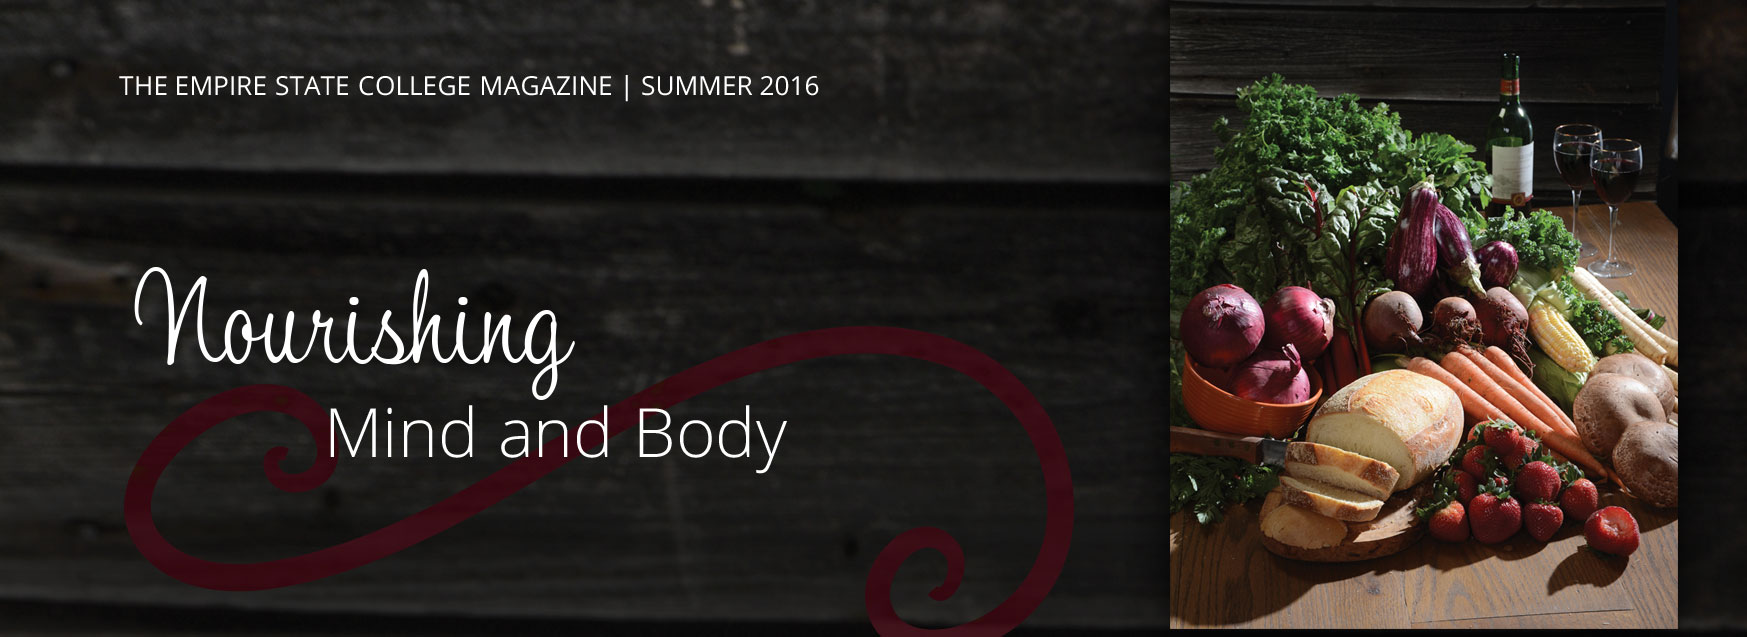 The Empire State College Magazine, Summer 2016: Nourishing Mind and Body